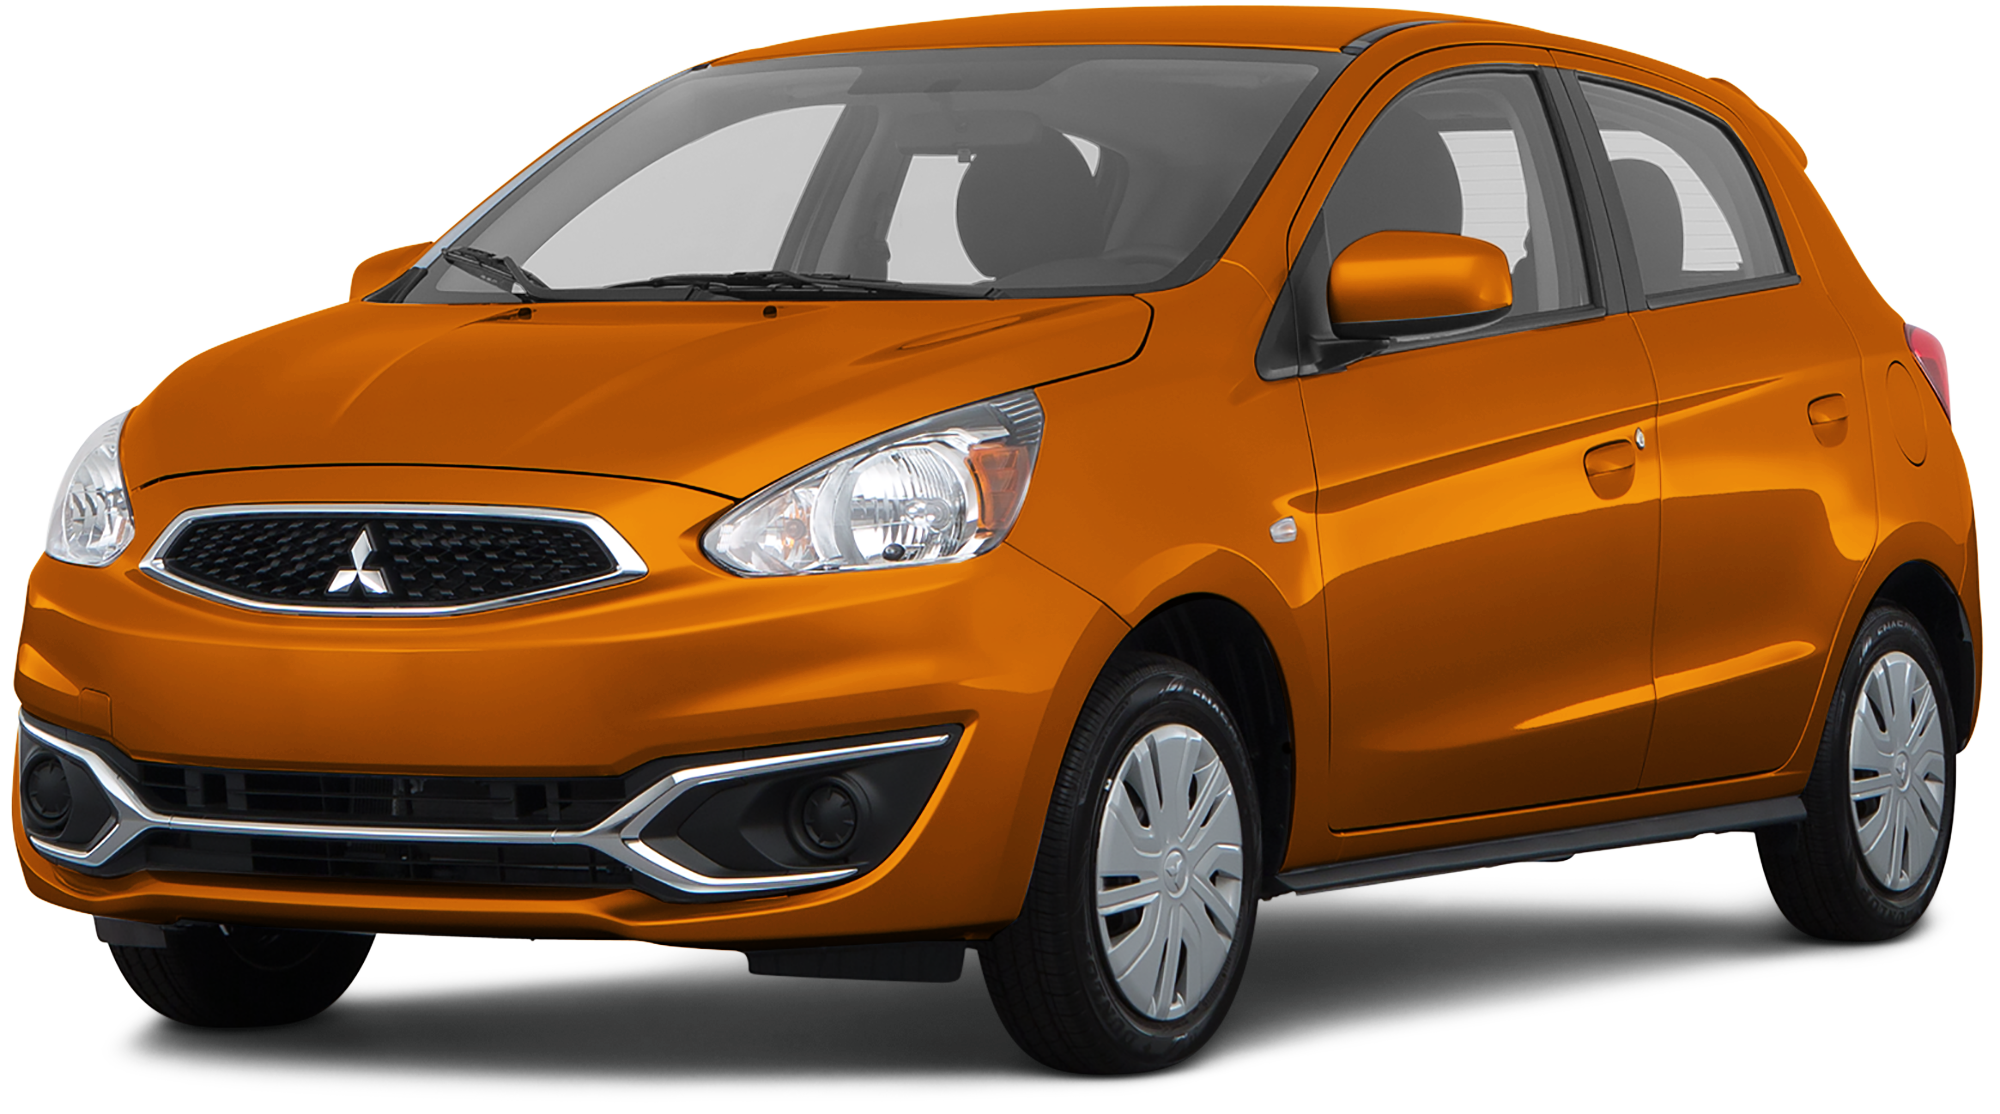 2020 Mitsubishi Mirage Incentives, Specials & Offers in JACKSONVILLE FL